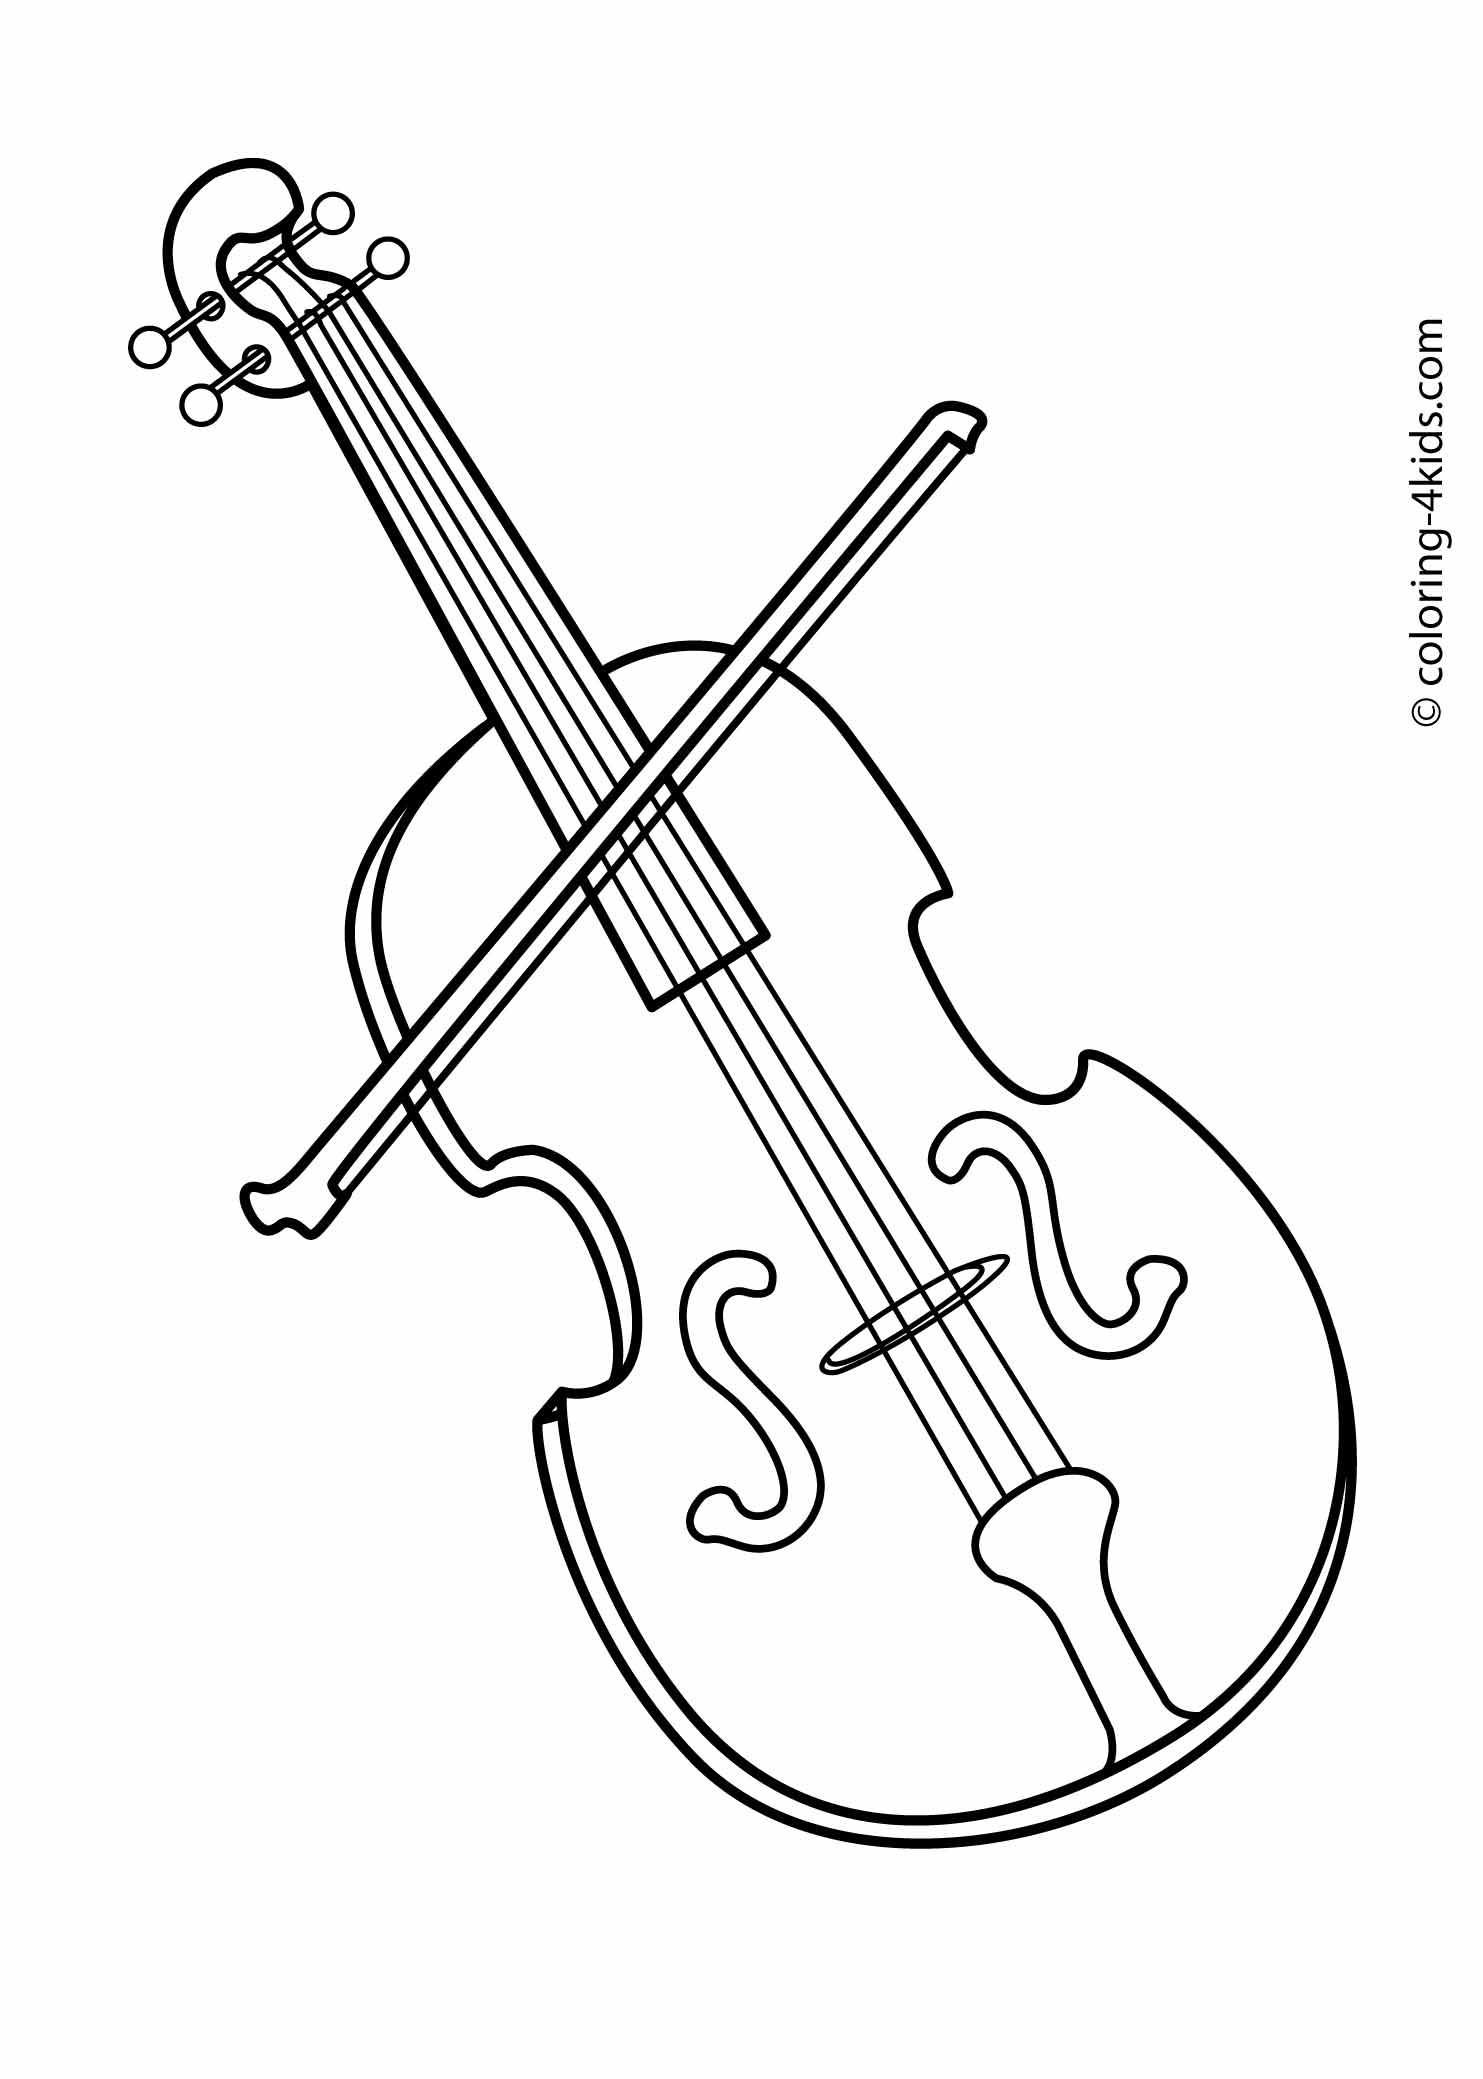 Jazz Music Illustrations Hand Drawn Musical Instruments Musical Orchestra  Stock Illustration - Download Image Now - iStock